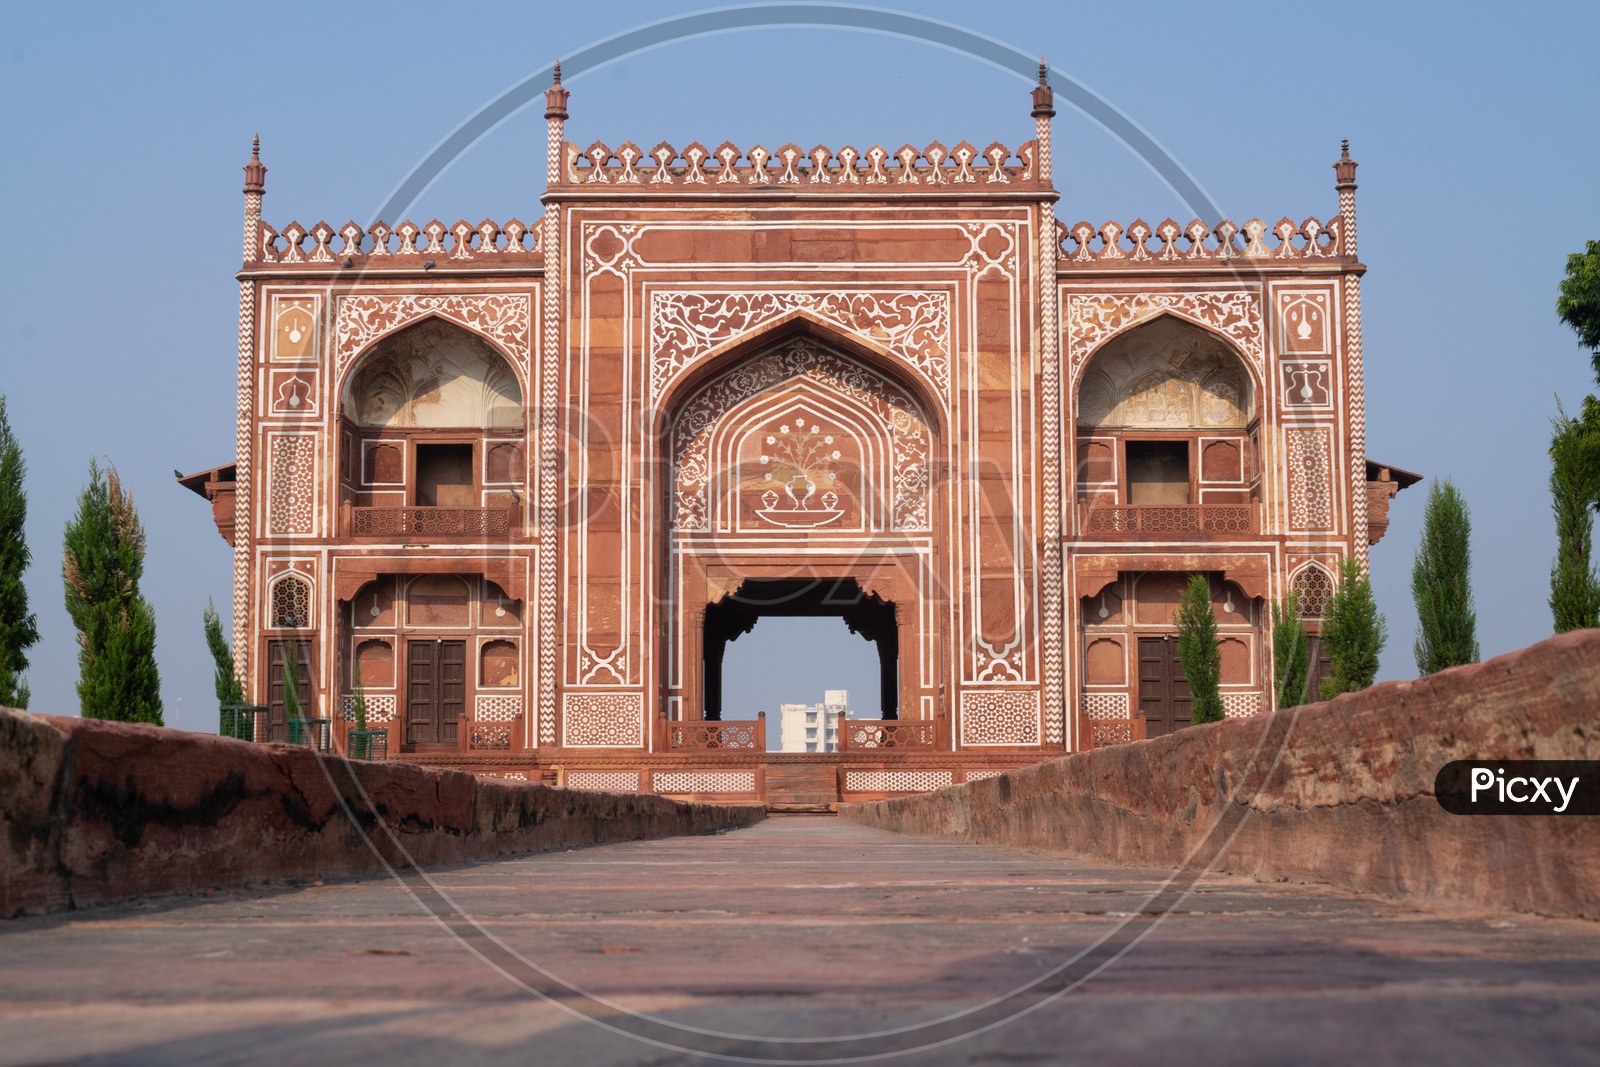 Itmad Ud Daula Tomb Entrance Arch in Agra